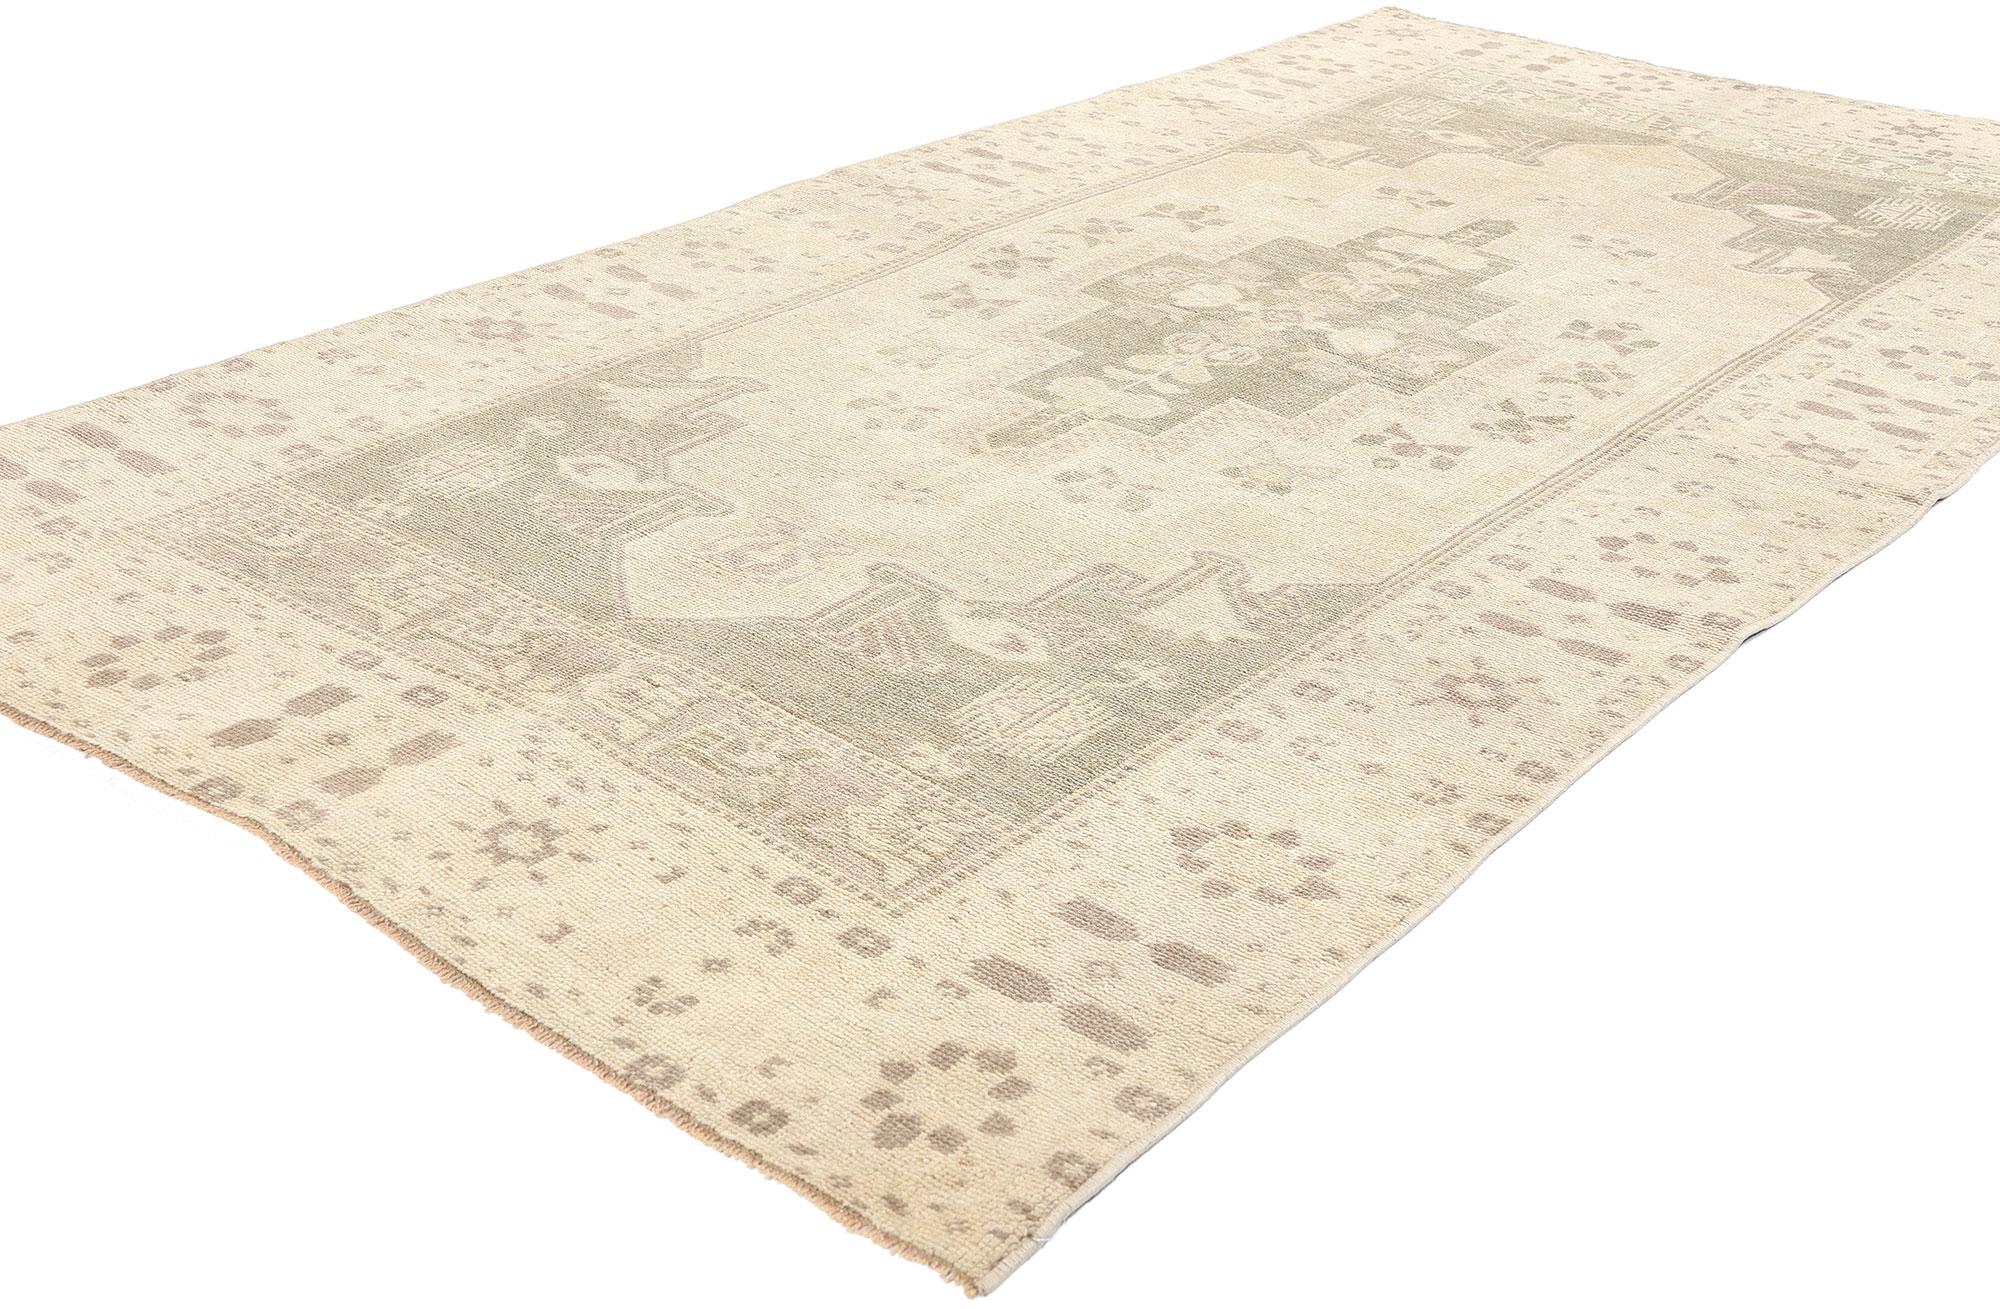 53676 Vintage Turkish Oushak Rug, 04'01 x 07'10. Drenched in tradition and artisanal craftsmanship, antique-washed Turkish Oushak rugs originating from the Oushak region undergo a meticulous washing process, inviting the nostalgia of yesteryears.